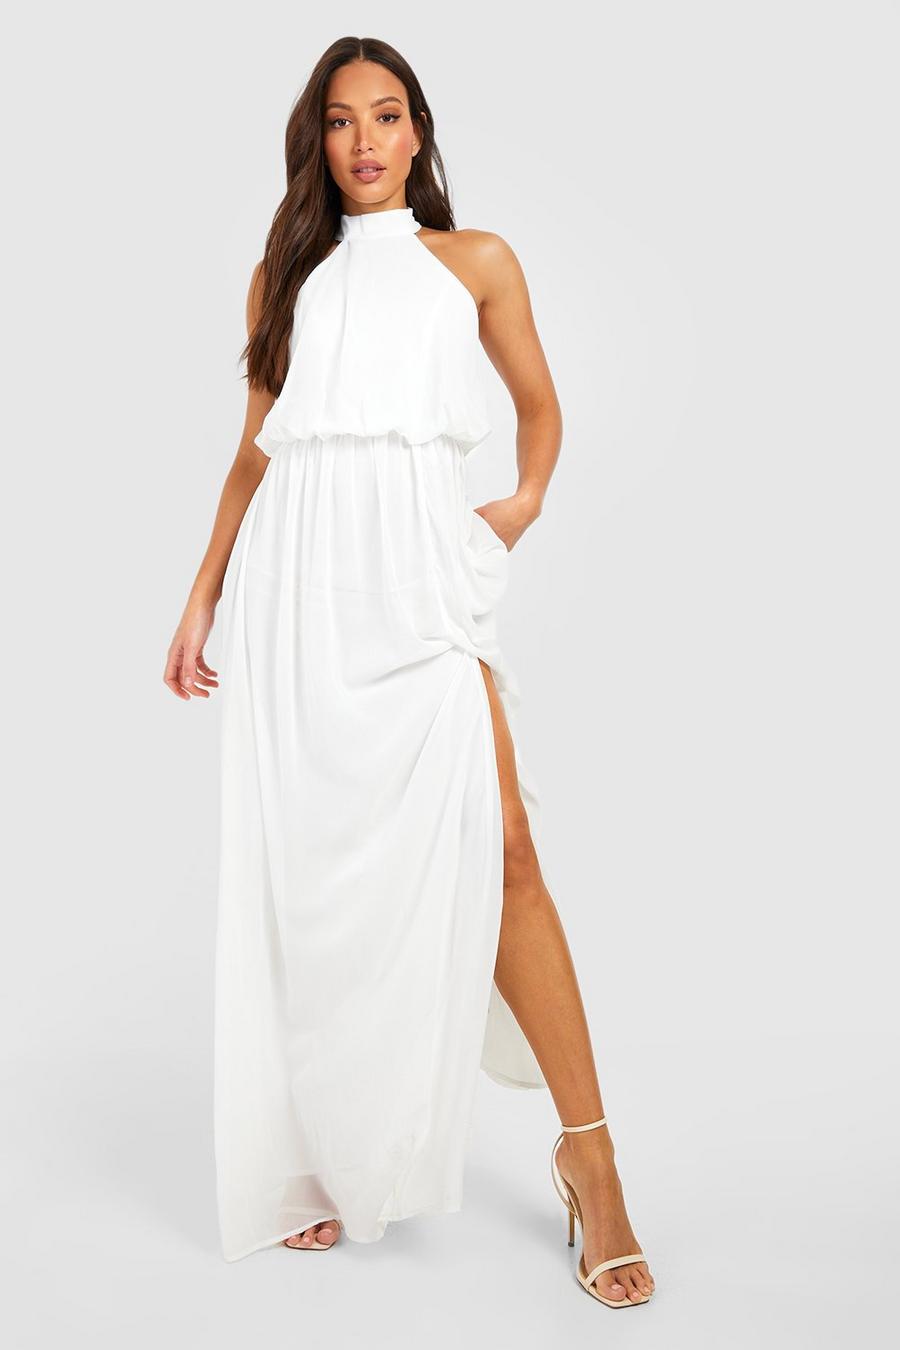 Ivory white Tall Halter Neck Occasion Maxi Dress